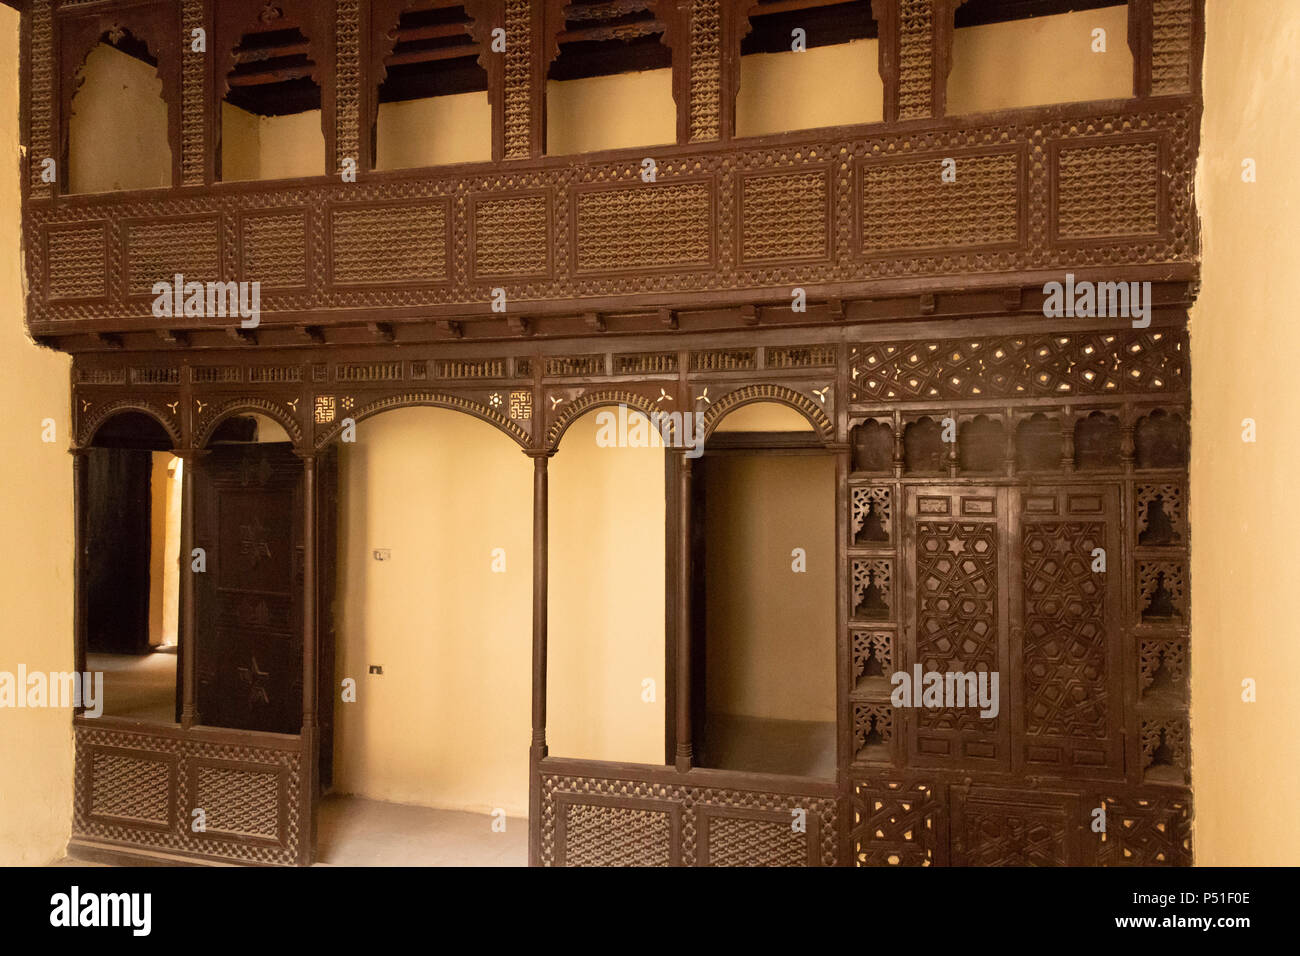 detail of wooden cupboards in al-Amasyali house, Ottoman period, Rosetta, Egypt Stock Photo